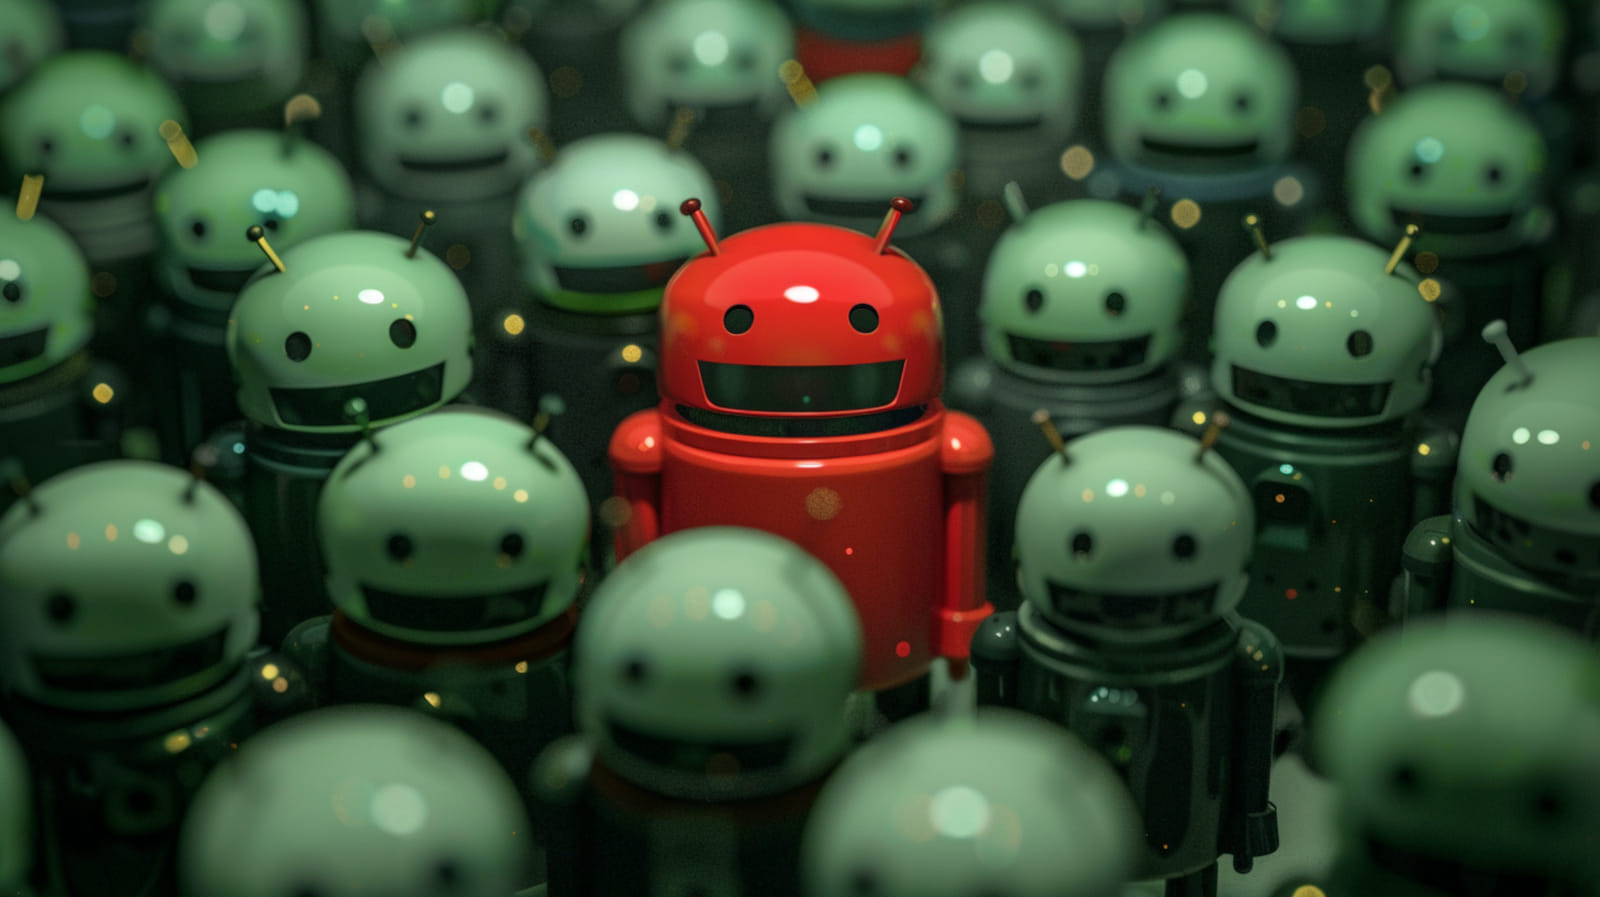 Snowblind malware abuses Android security feature to bypass security